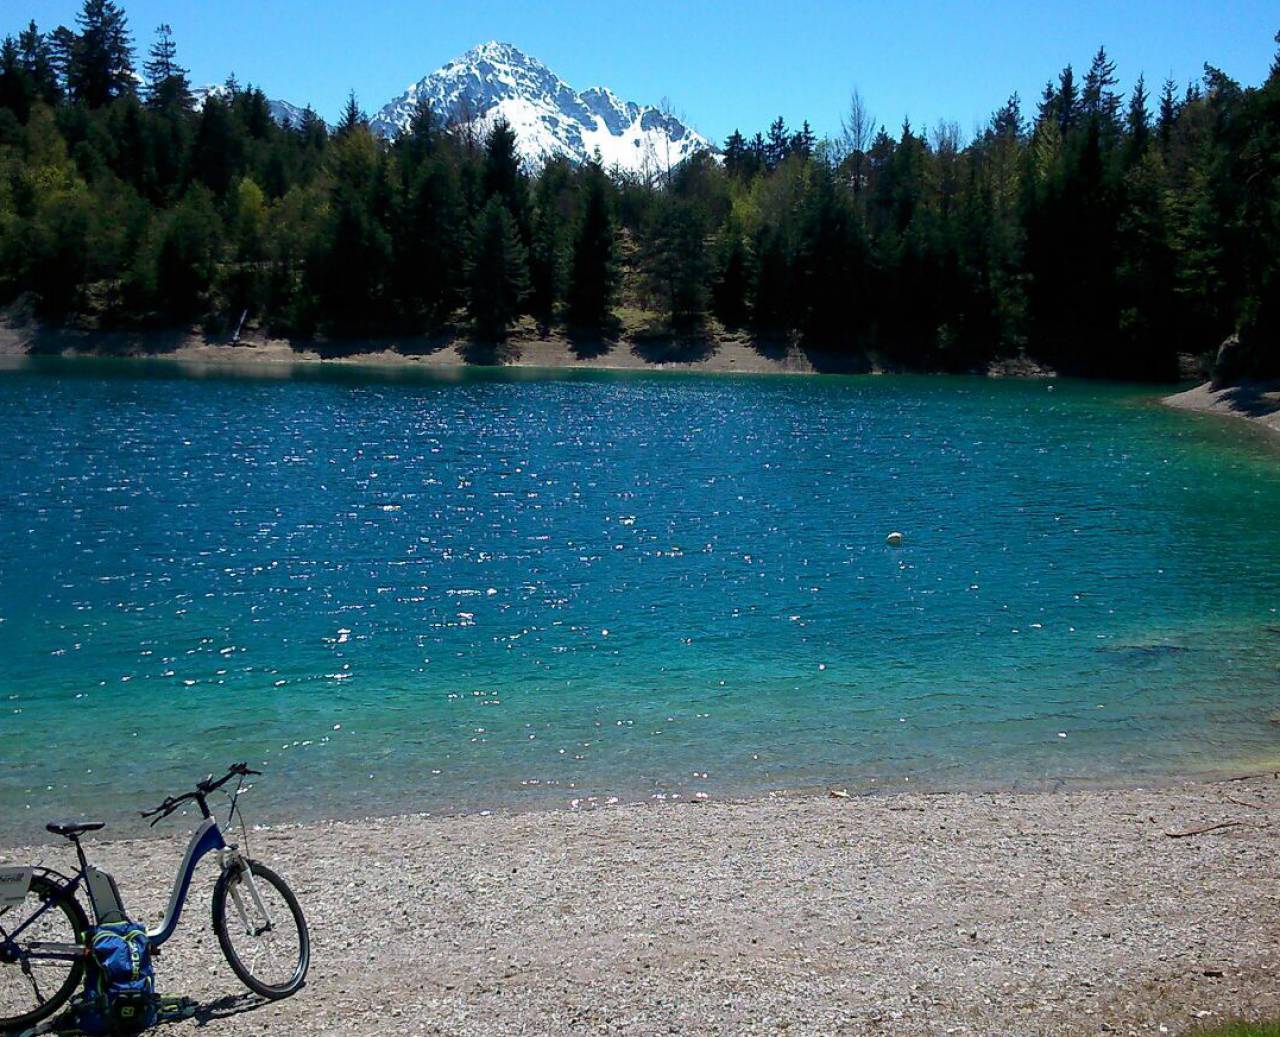 E-bike in front of mountain lake in forest with snowy mountains